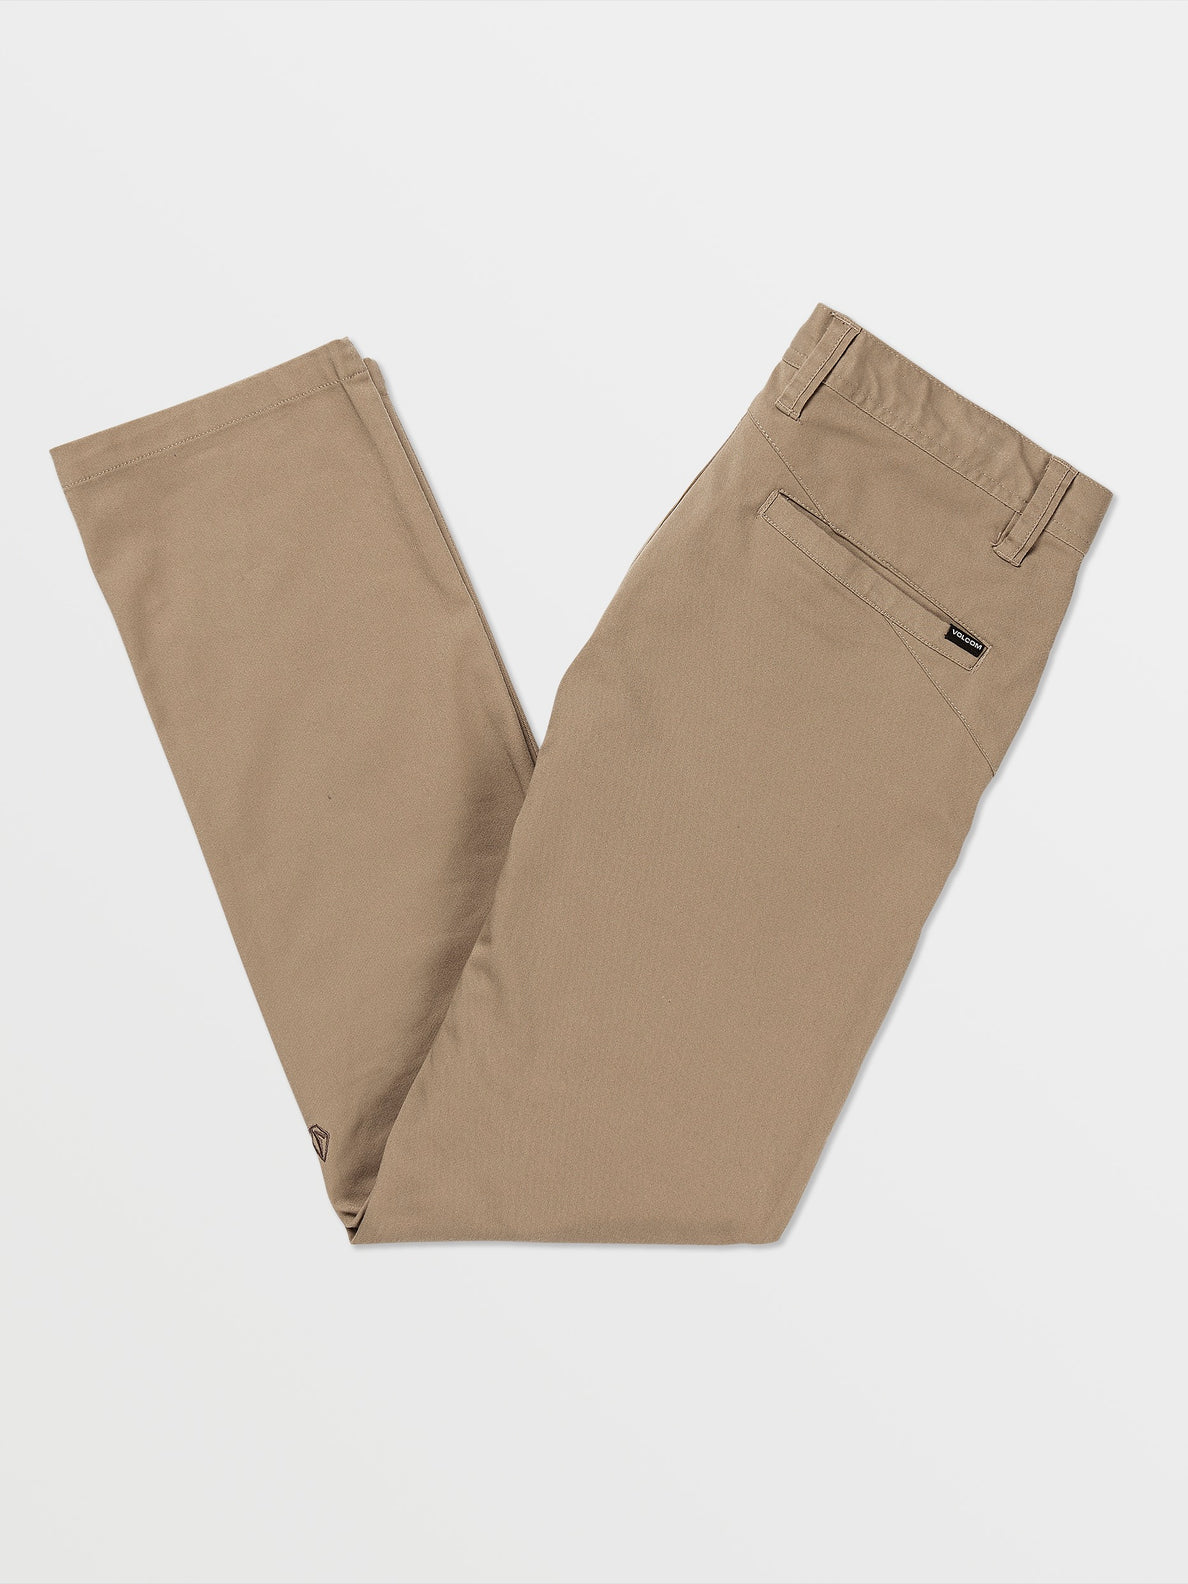 Volcom Ironwood Tech Chino Pants comfort Holf,travelWorker Stretch  .Green,W36L32